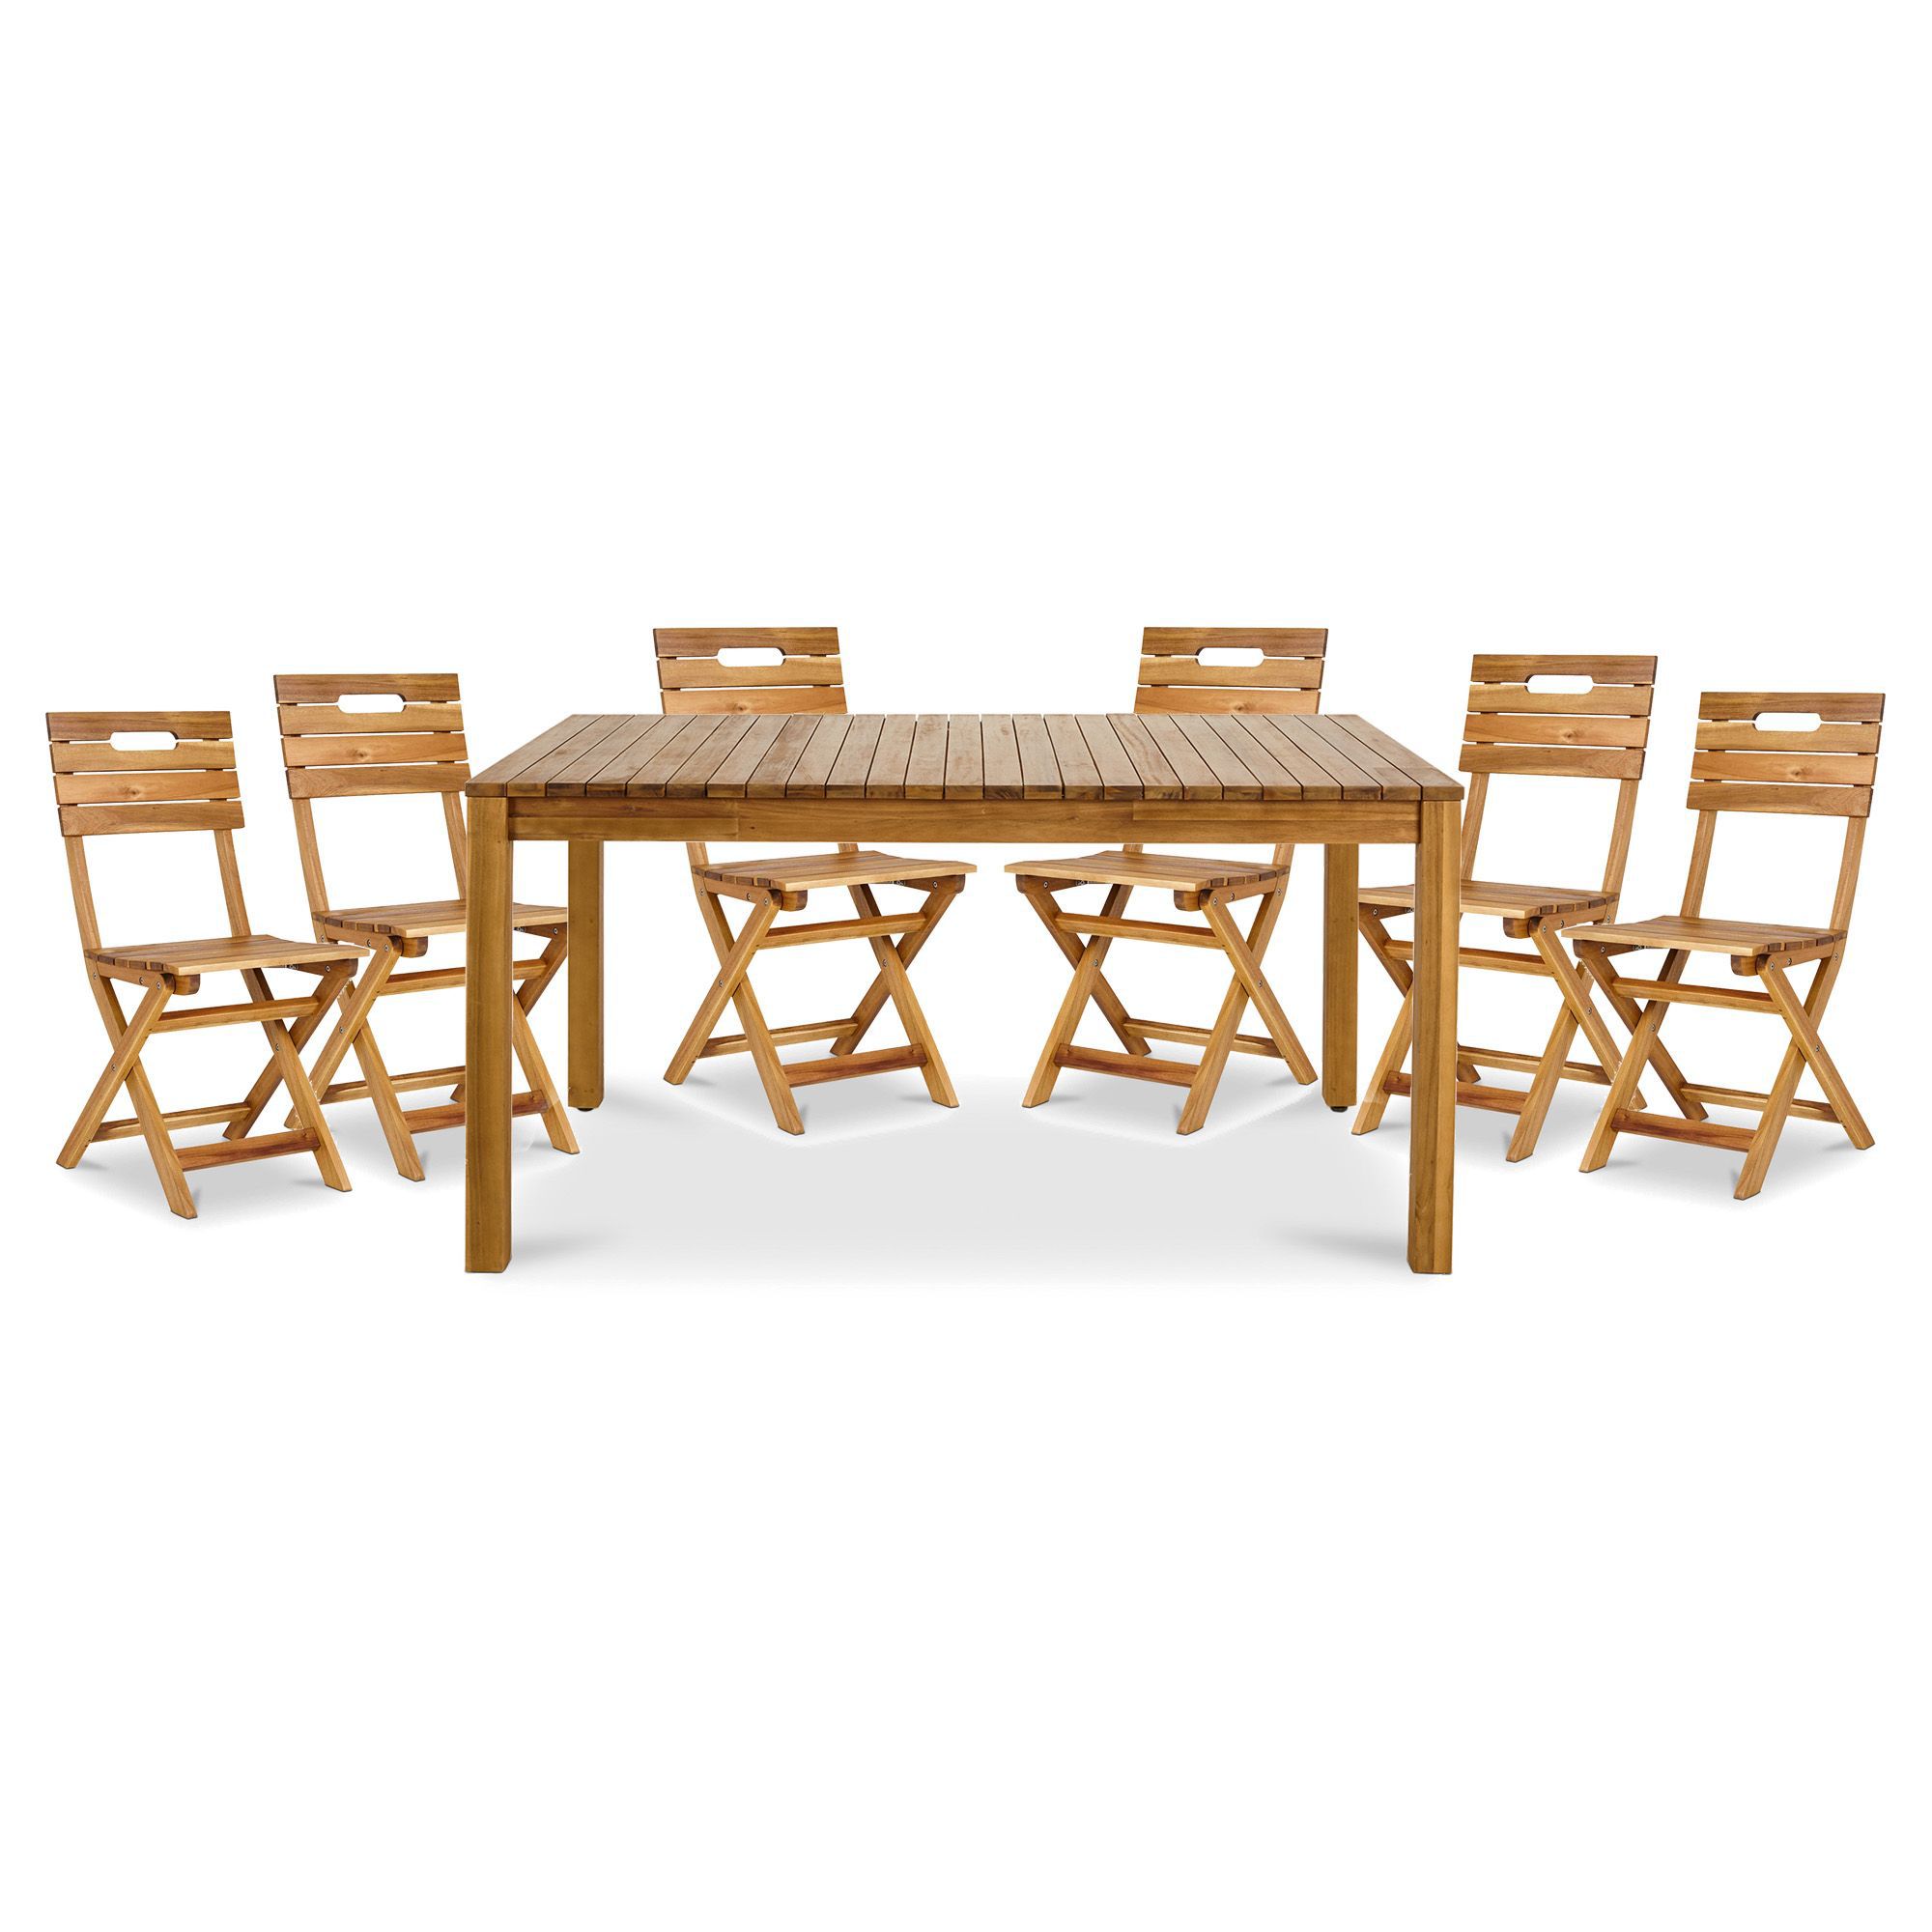 GoodHome Denia Acacia Wooden 6 seater Dining set with foldable chairs